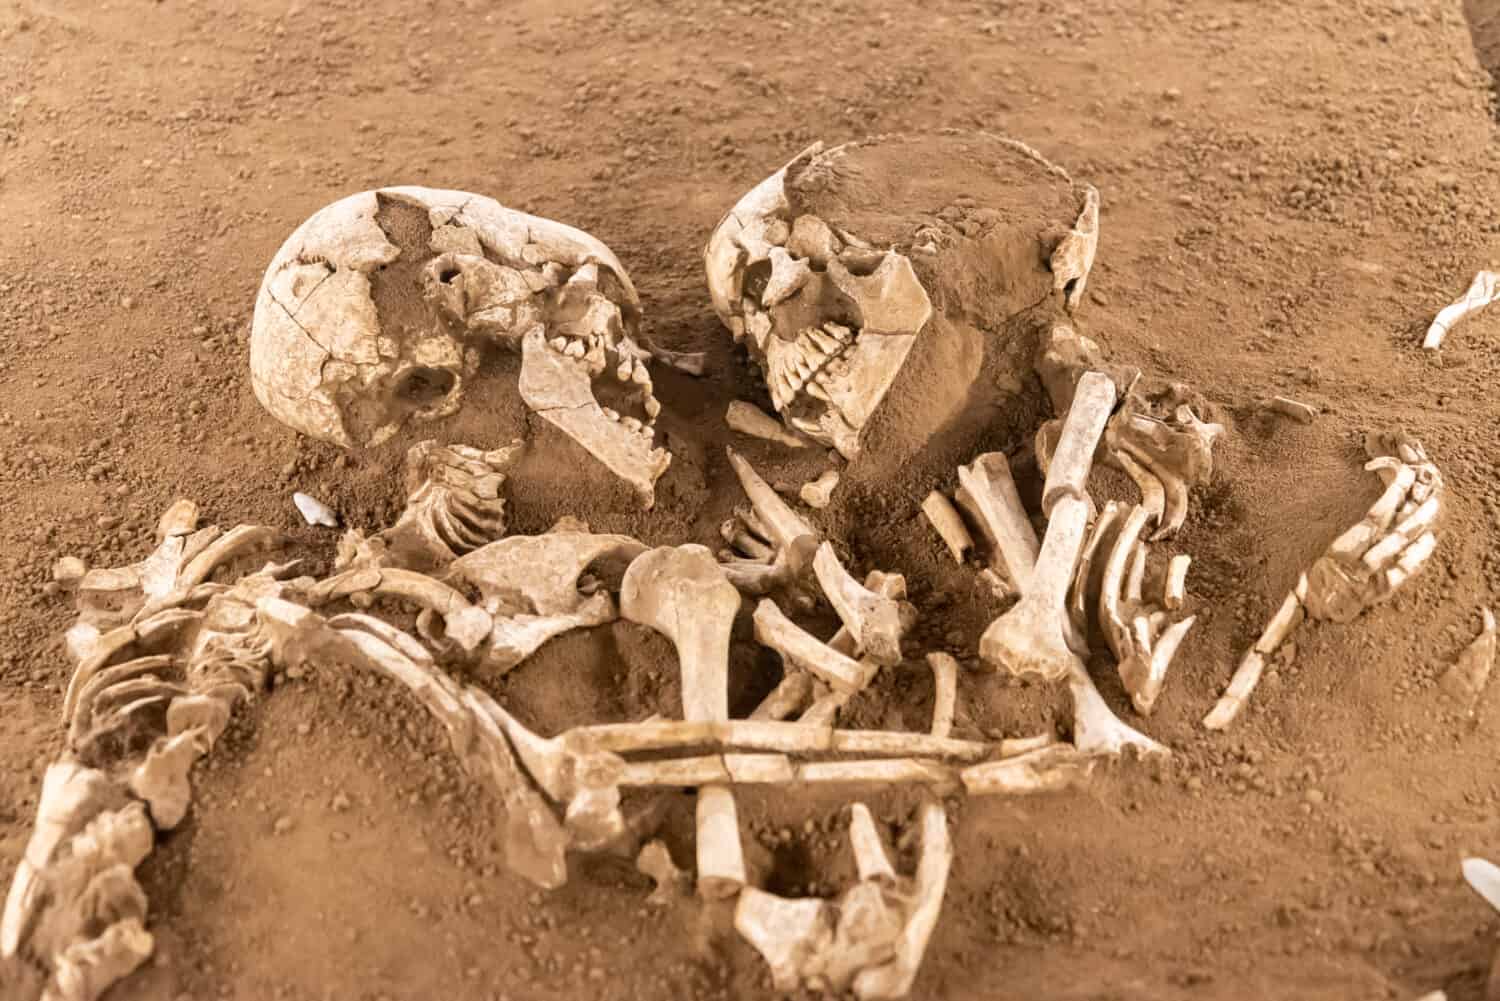 The fossilized remains of Homo sapiens uncovered at Jebel Irhoud, Morocco.